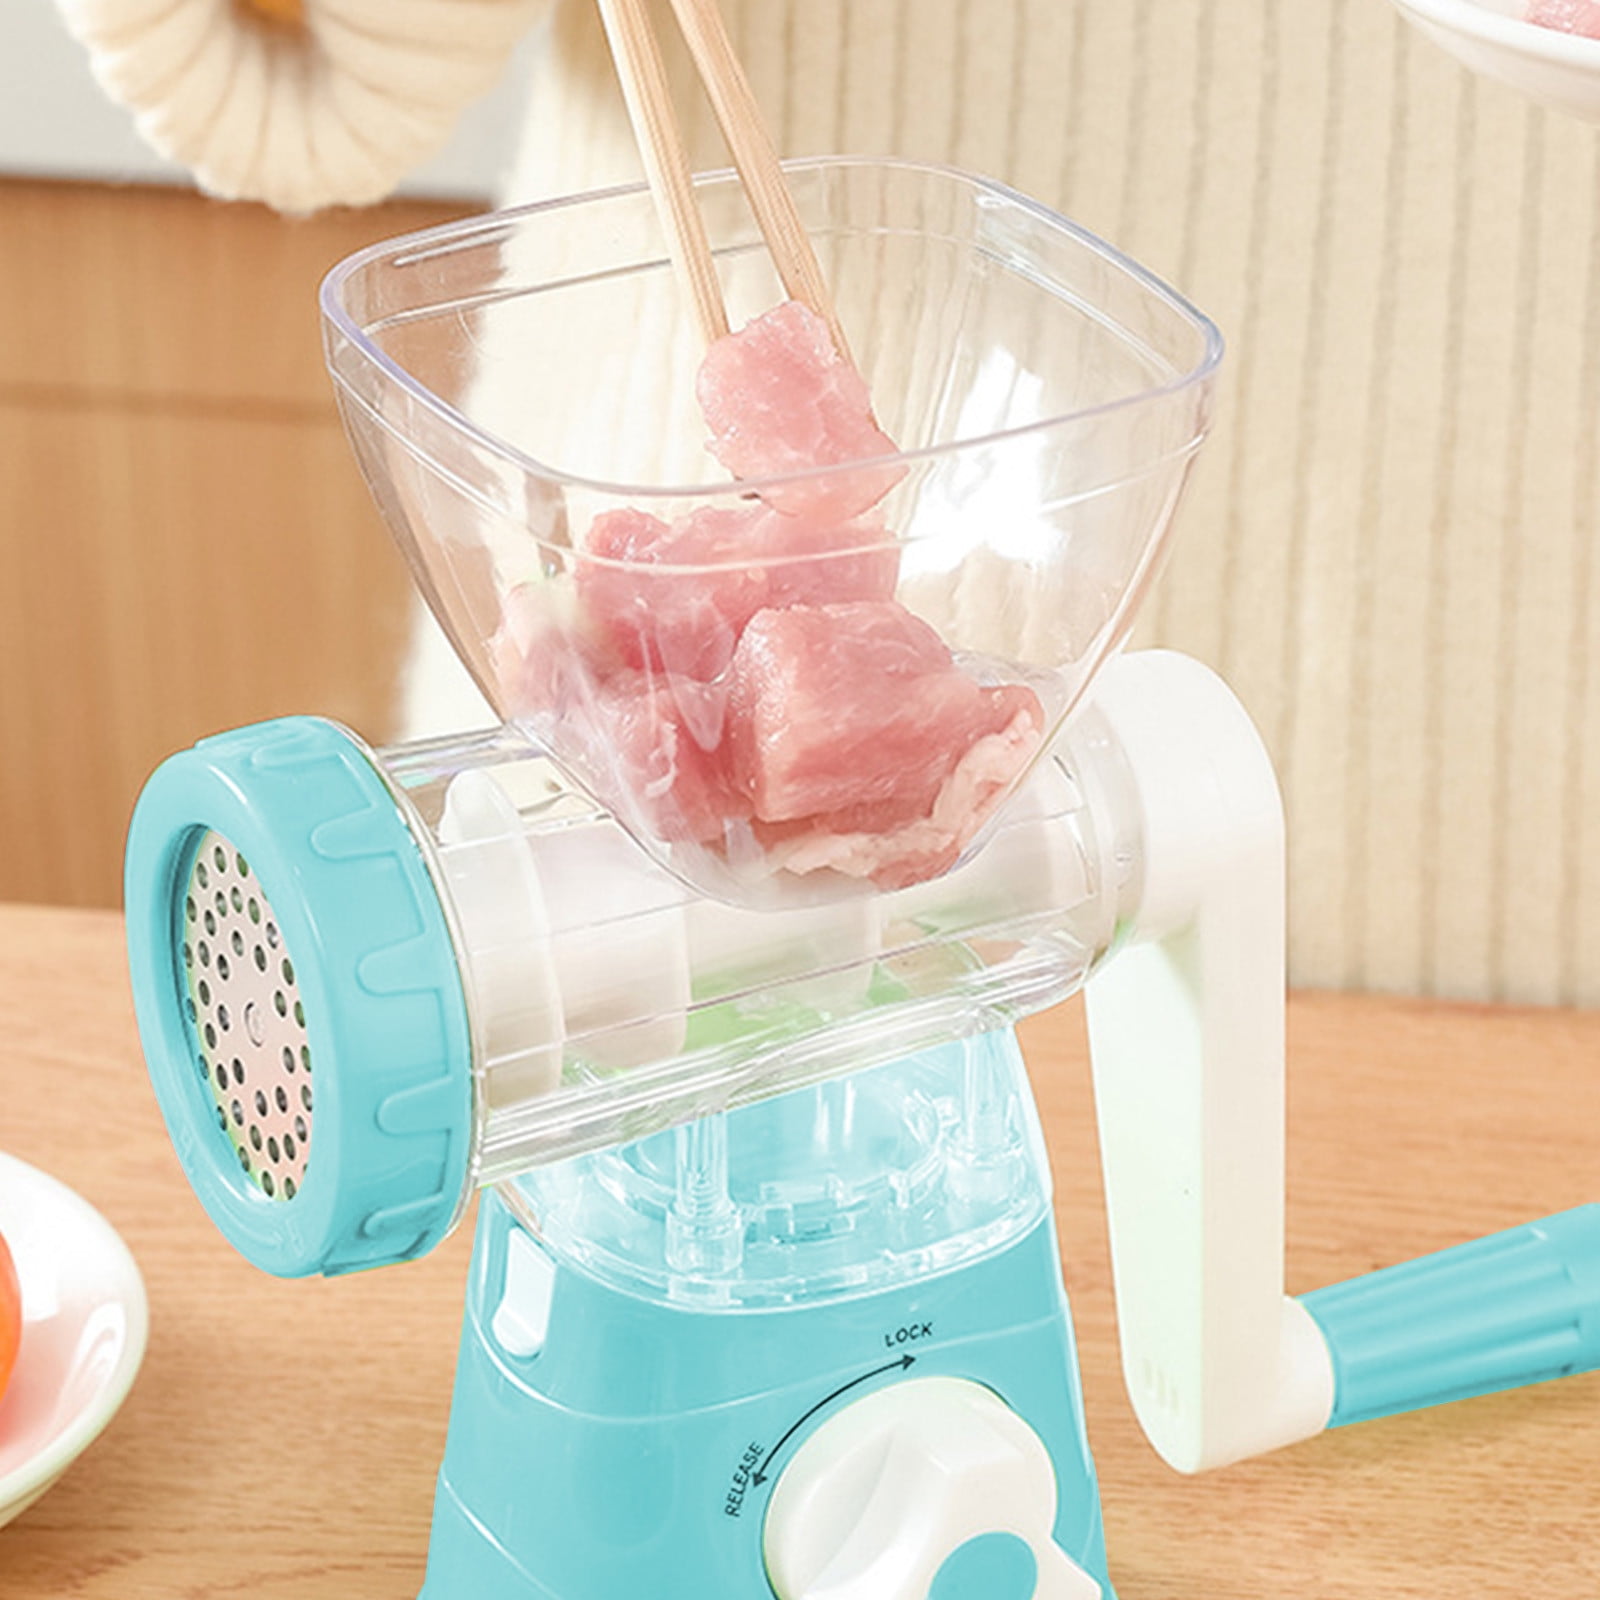 Trumoontree Manual Stainless Steel Meat Grinder Meat Mincer Sausage Stuffer  Filler Handheld Meat Ginding Machine